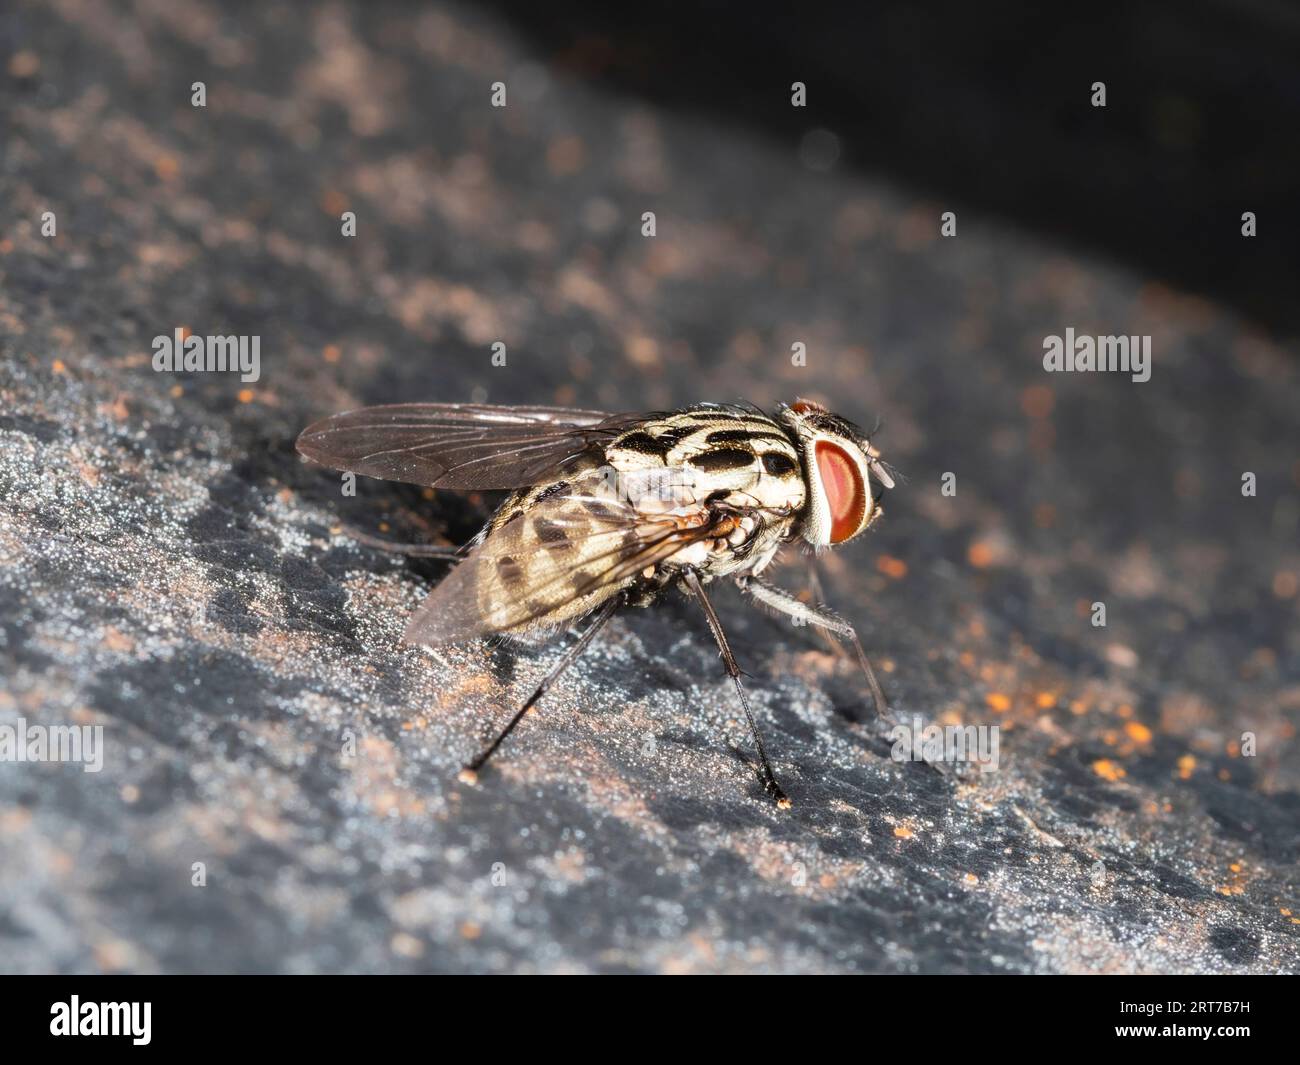 Black and white adult female muscid fly, Graphomya maculata, resting by standing water in a Plymouth, UK garden Stock Photo